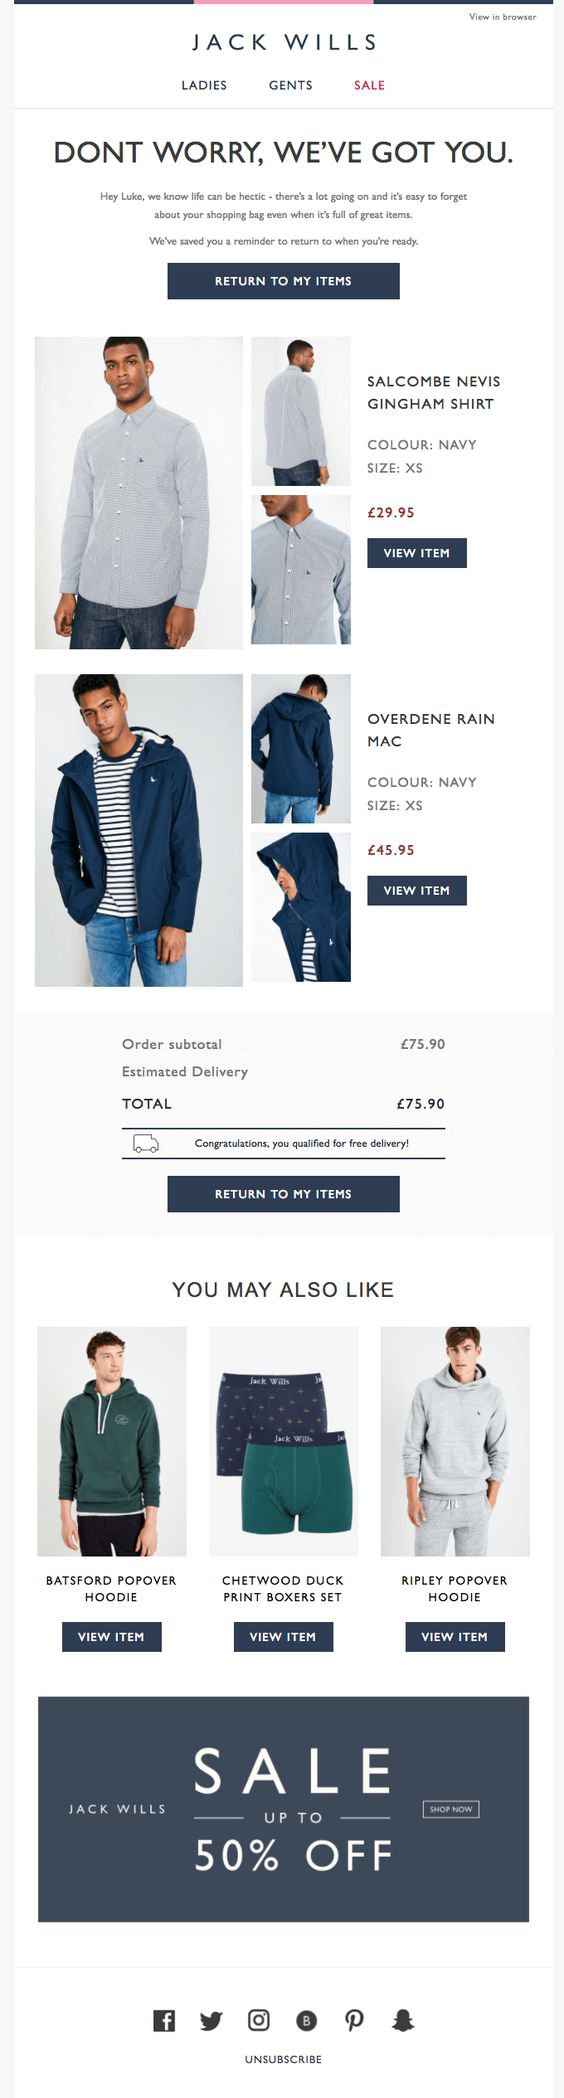 jack-wills-email-subject-line